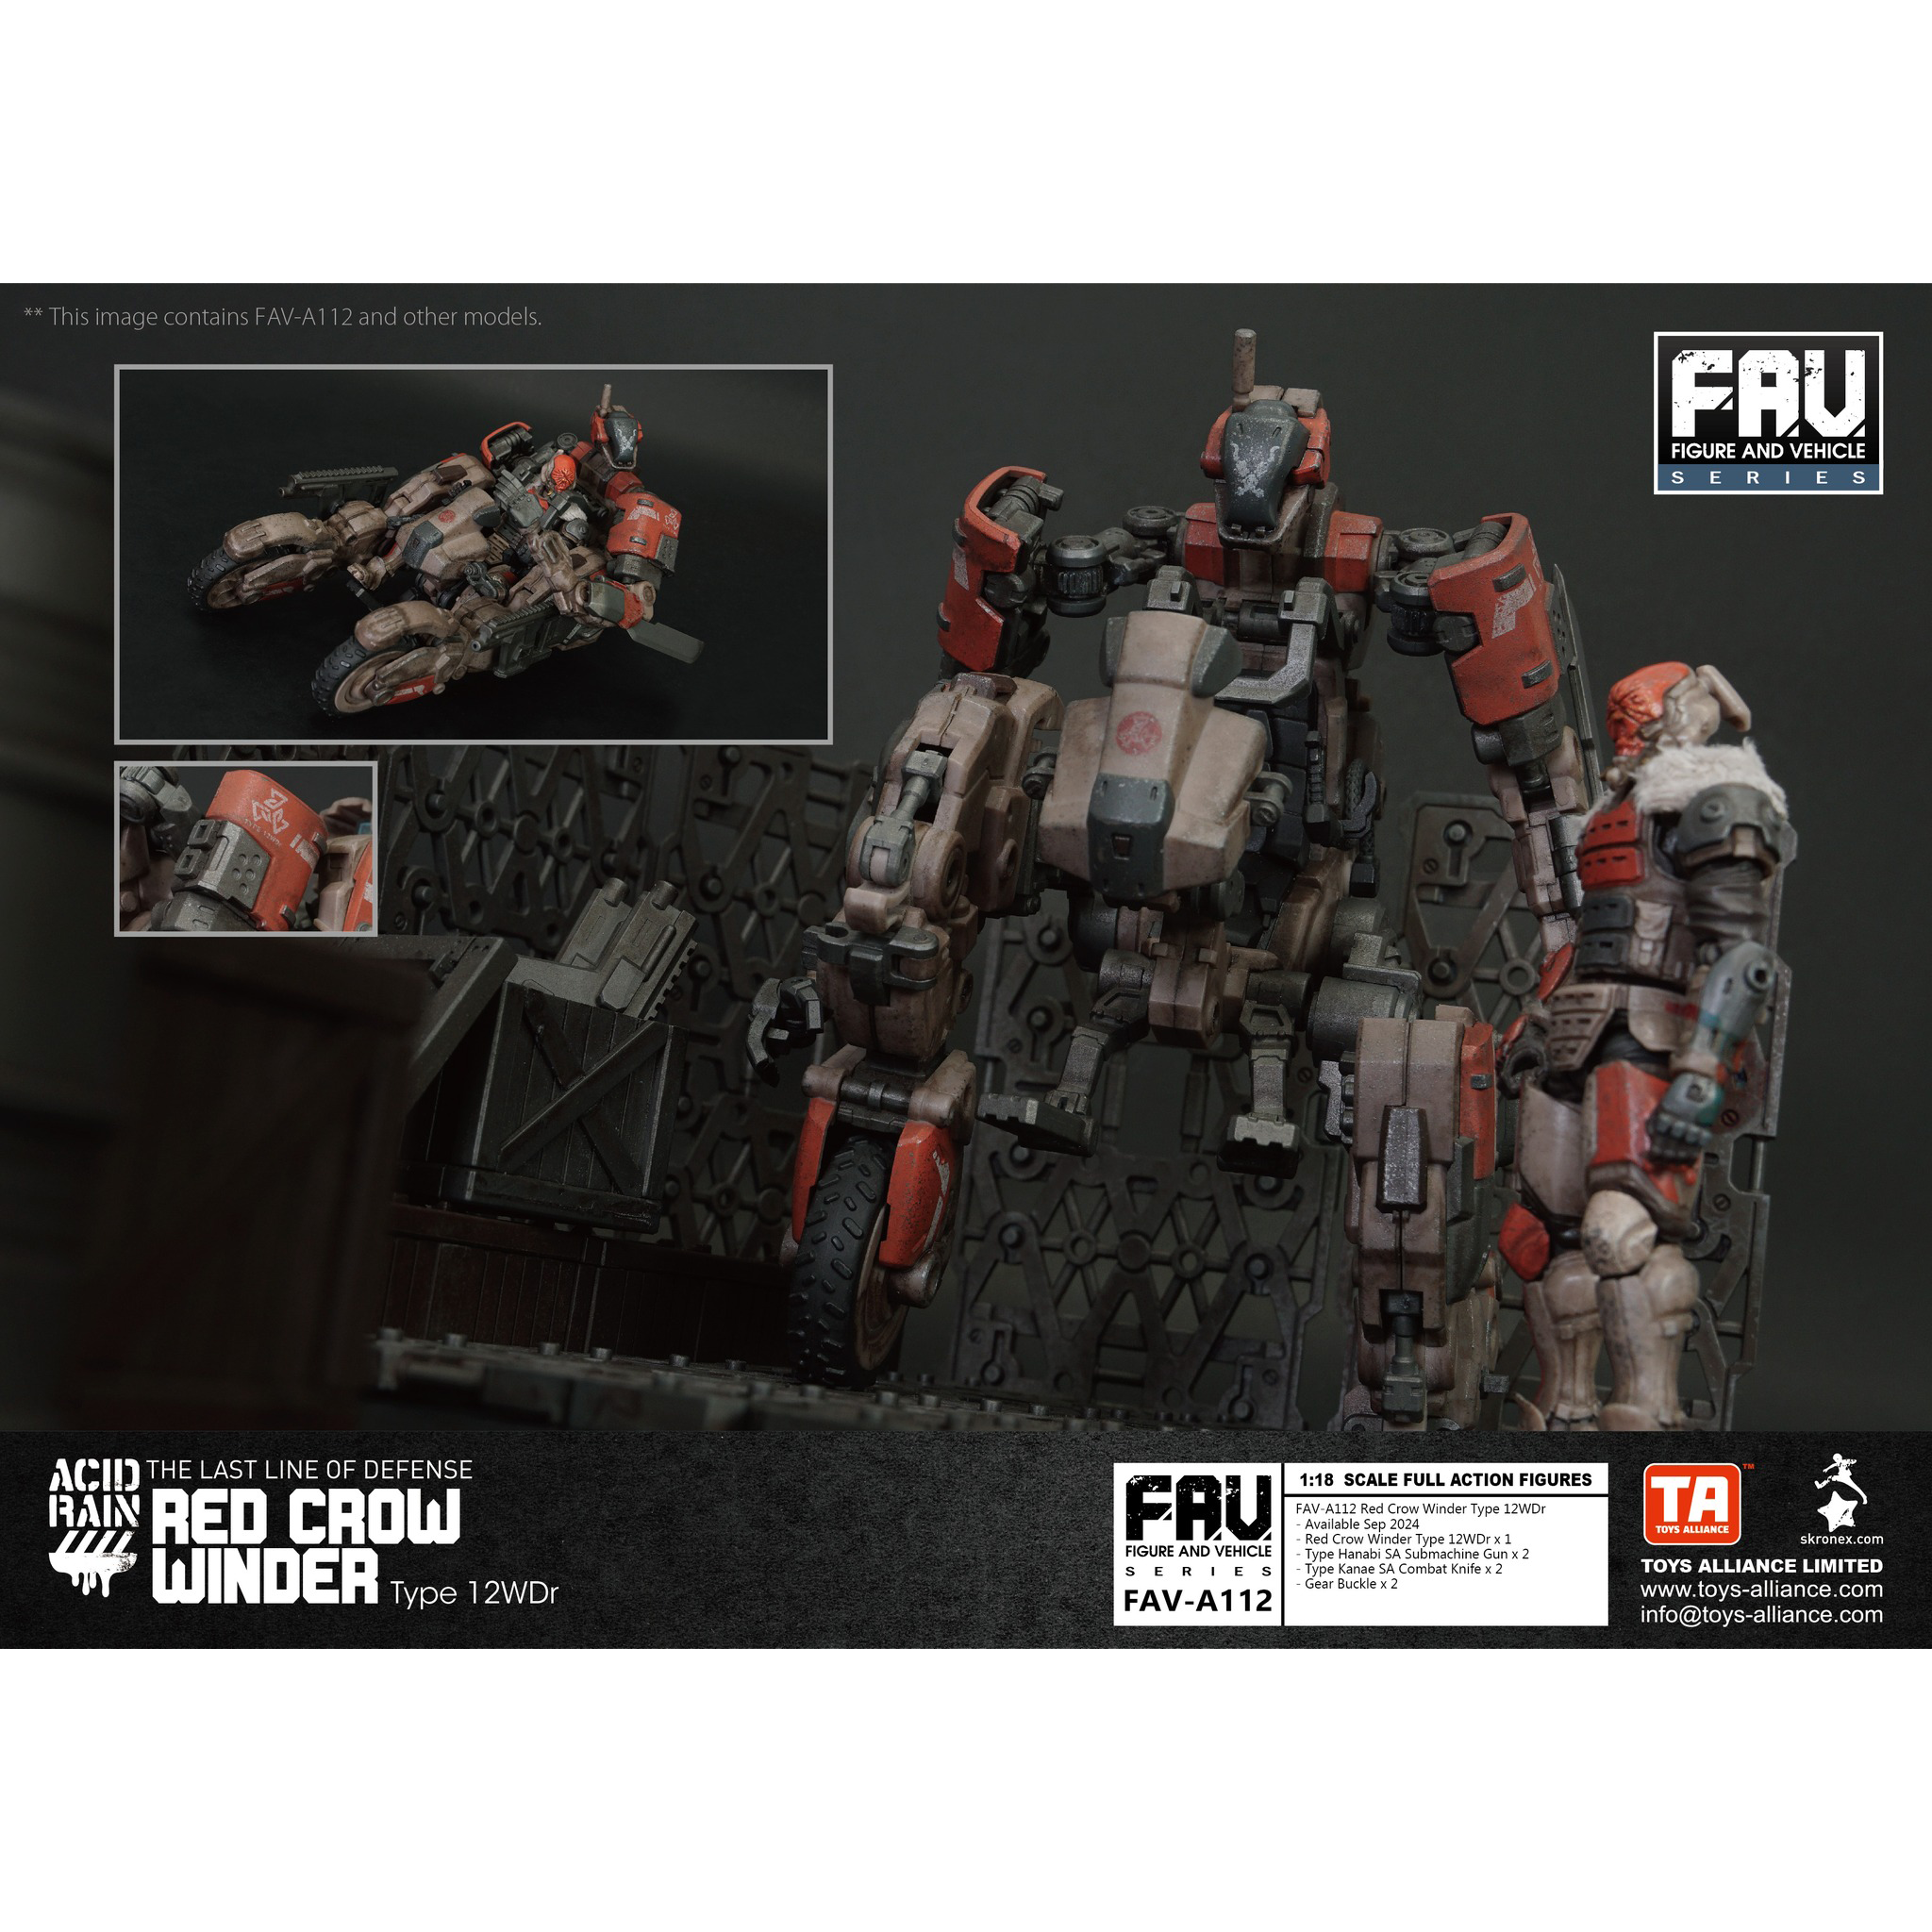 Toys Alliance - Acid Rain - FAV-A112 - Red Crow Winder Type 12WDr (1/18 Scale) - Marvelous Toys